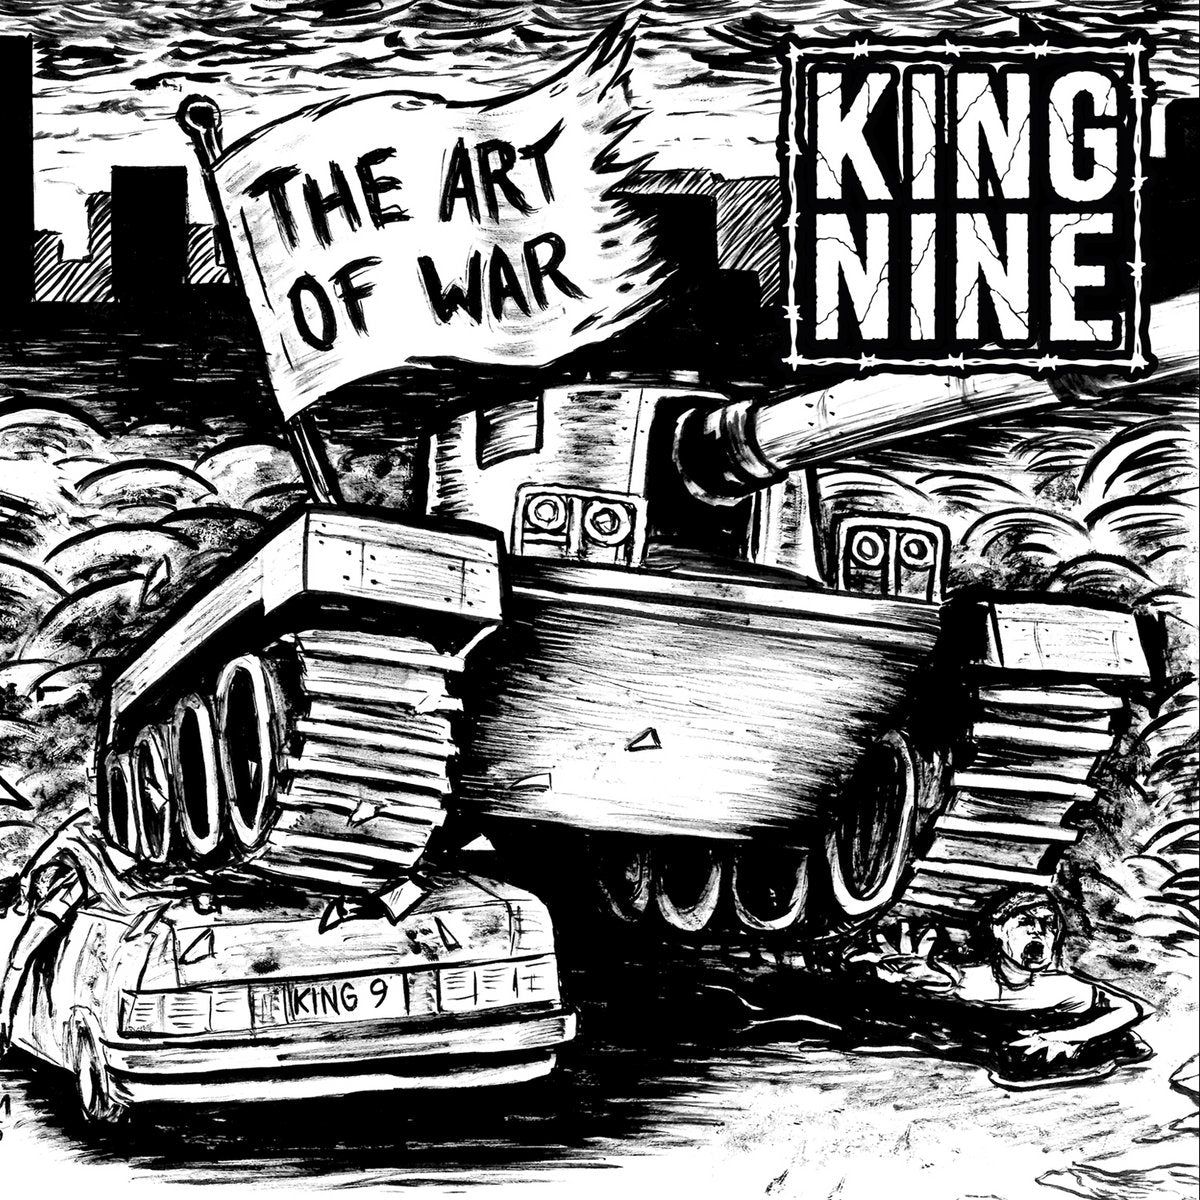 KING NINE 'The Art Of War' 7" / ETCH EDITION